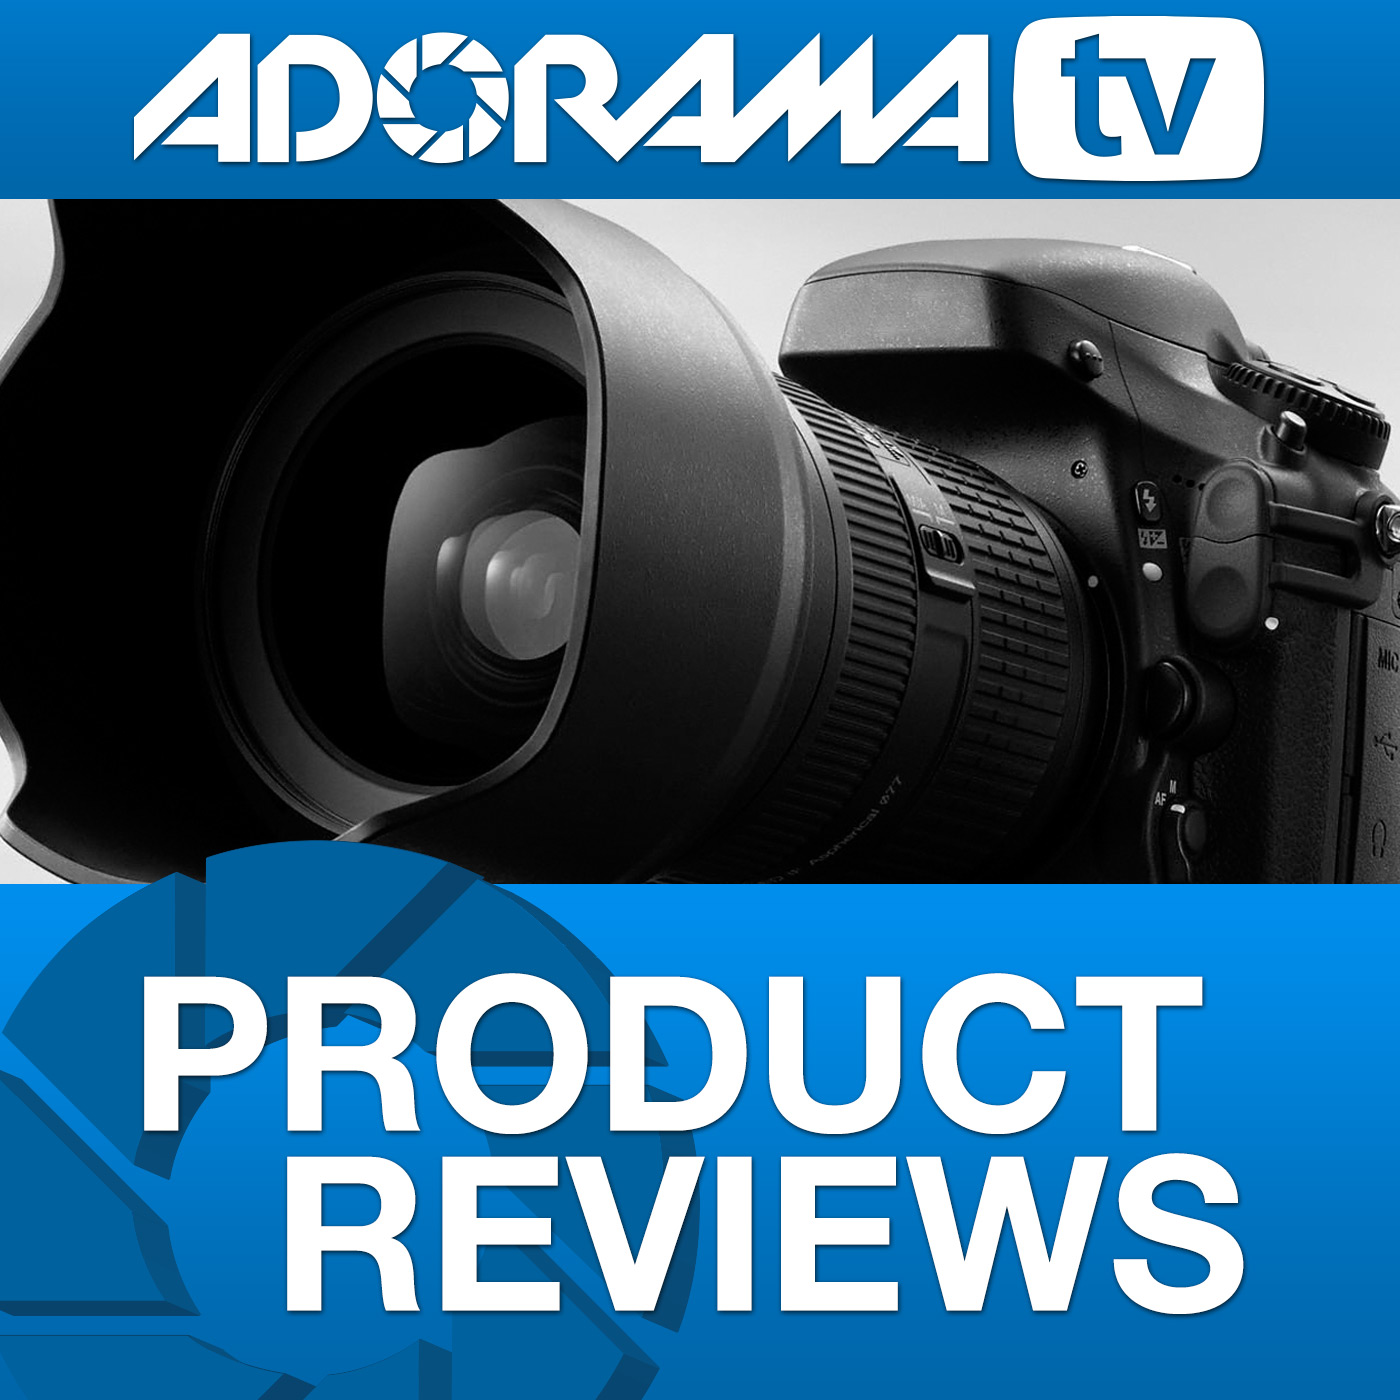 Bose SoundLink Bluetooth Speaker III : Product Overview : Adorama Photography TV.